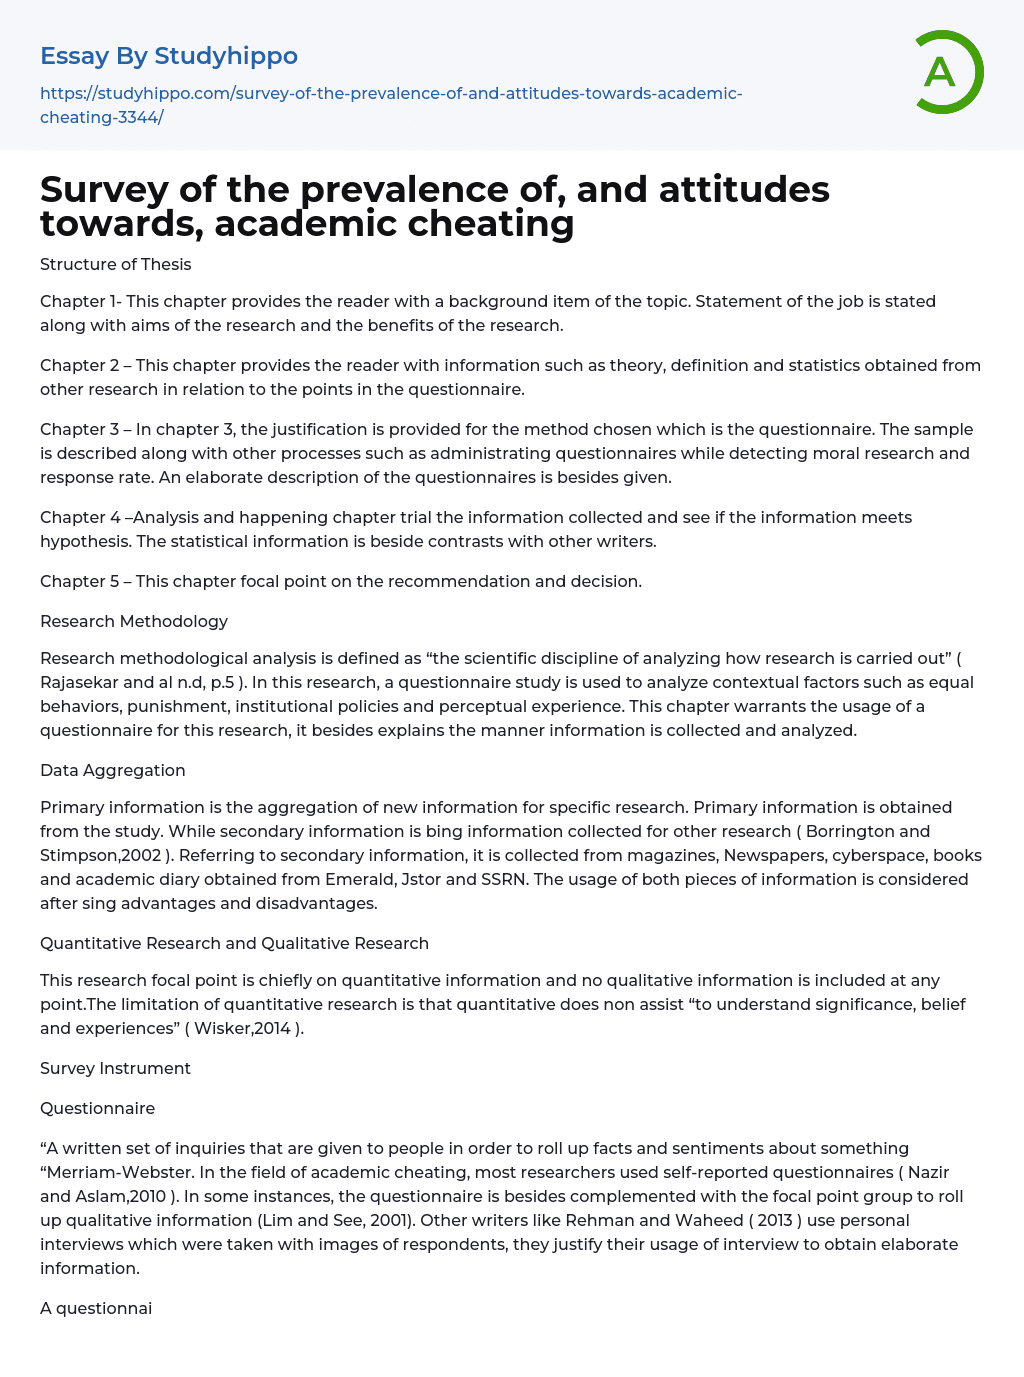 Survey of the prevalence of, and attitudes towards, academic cheating Essay Example